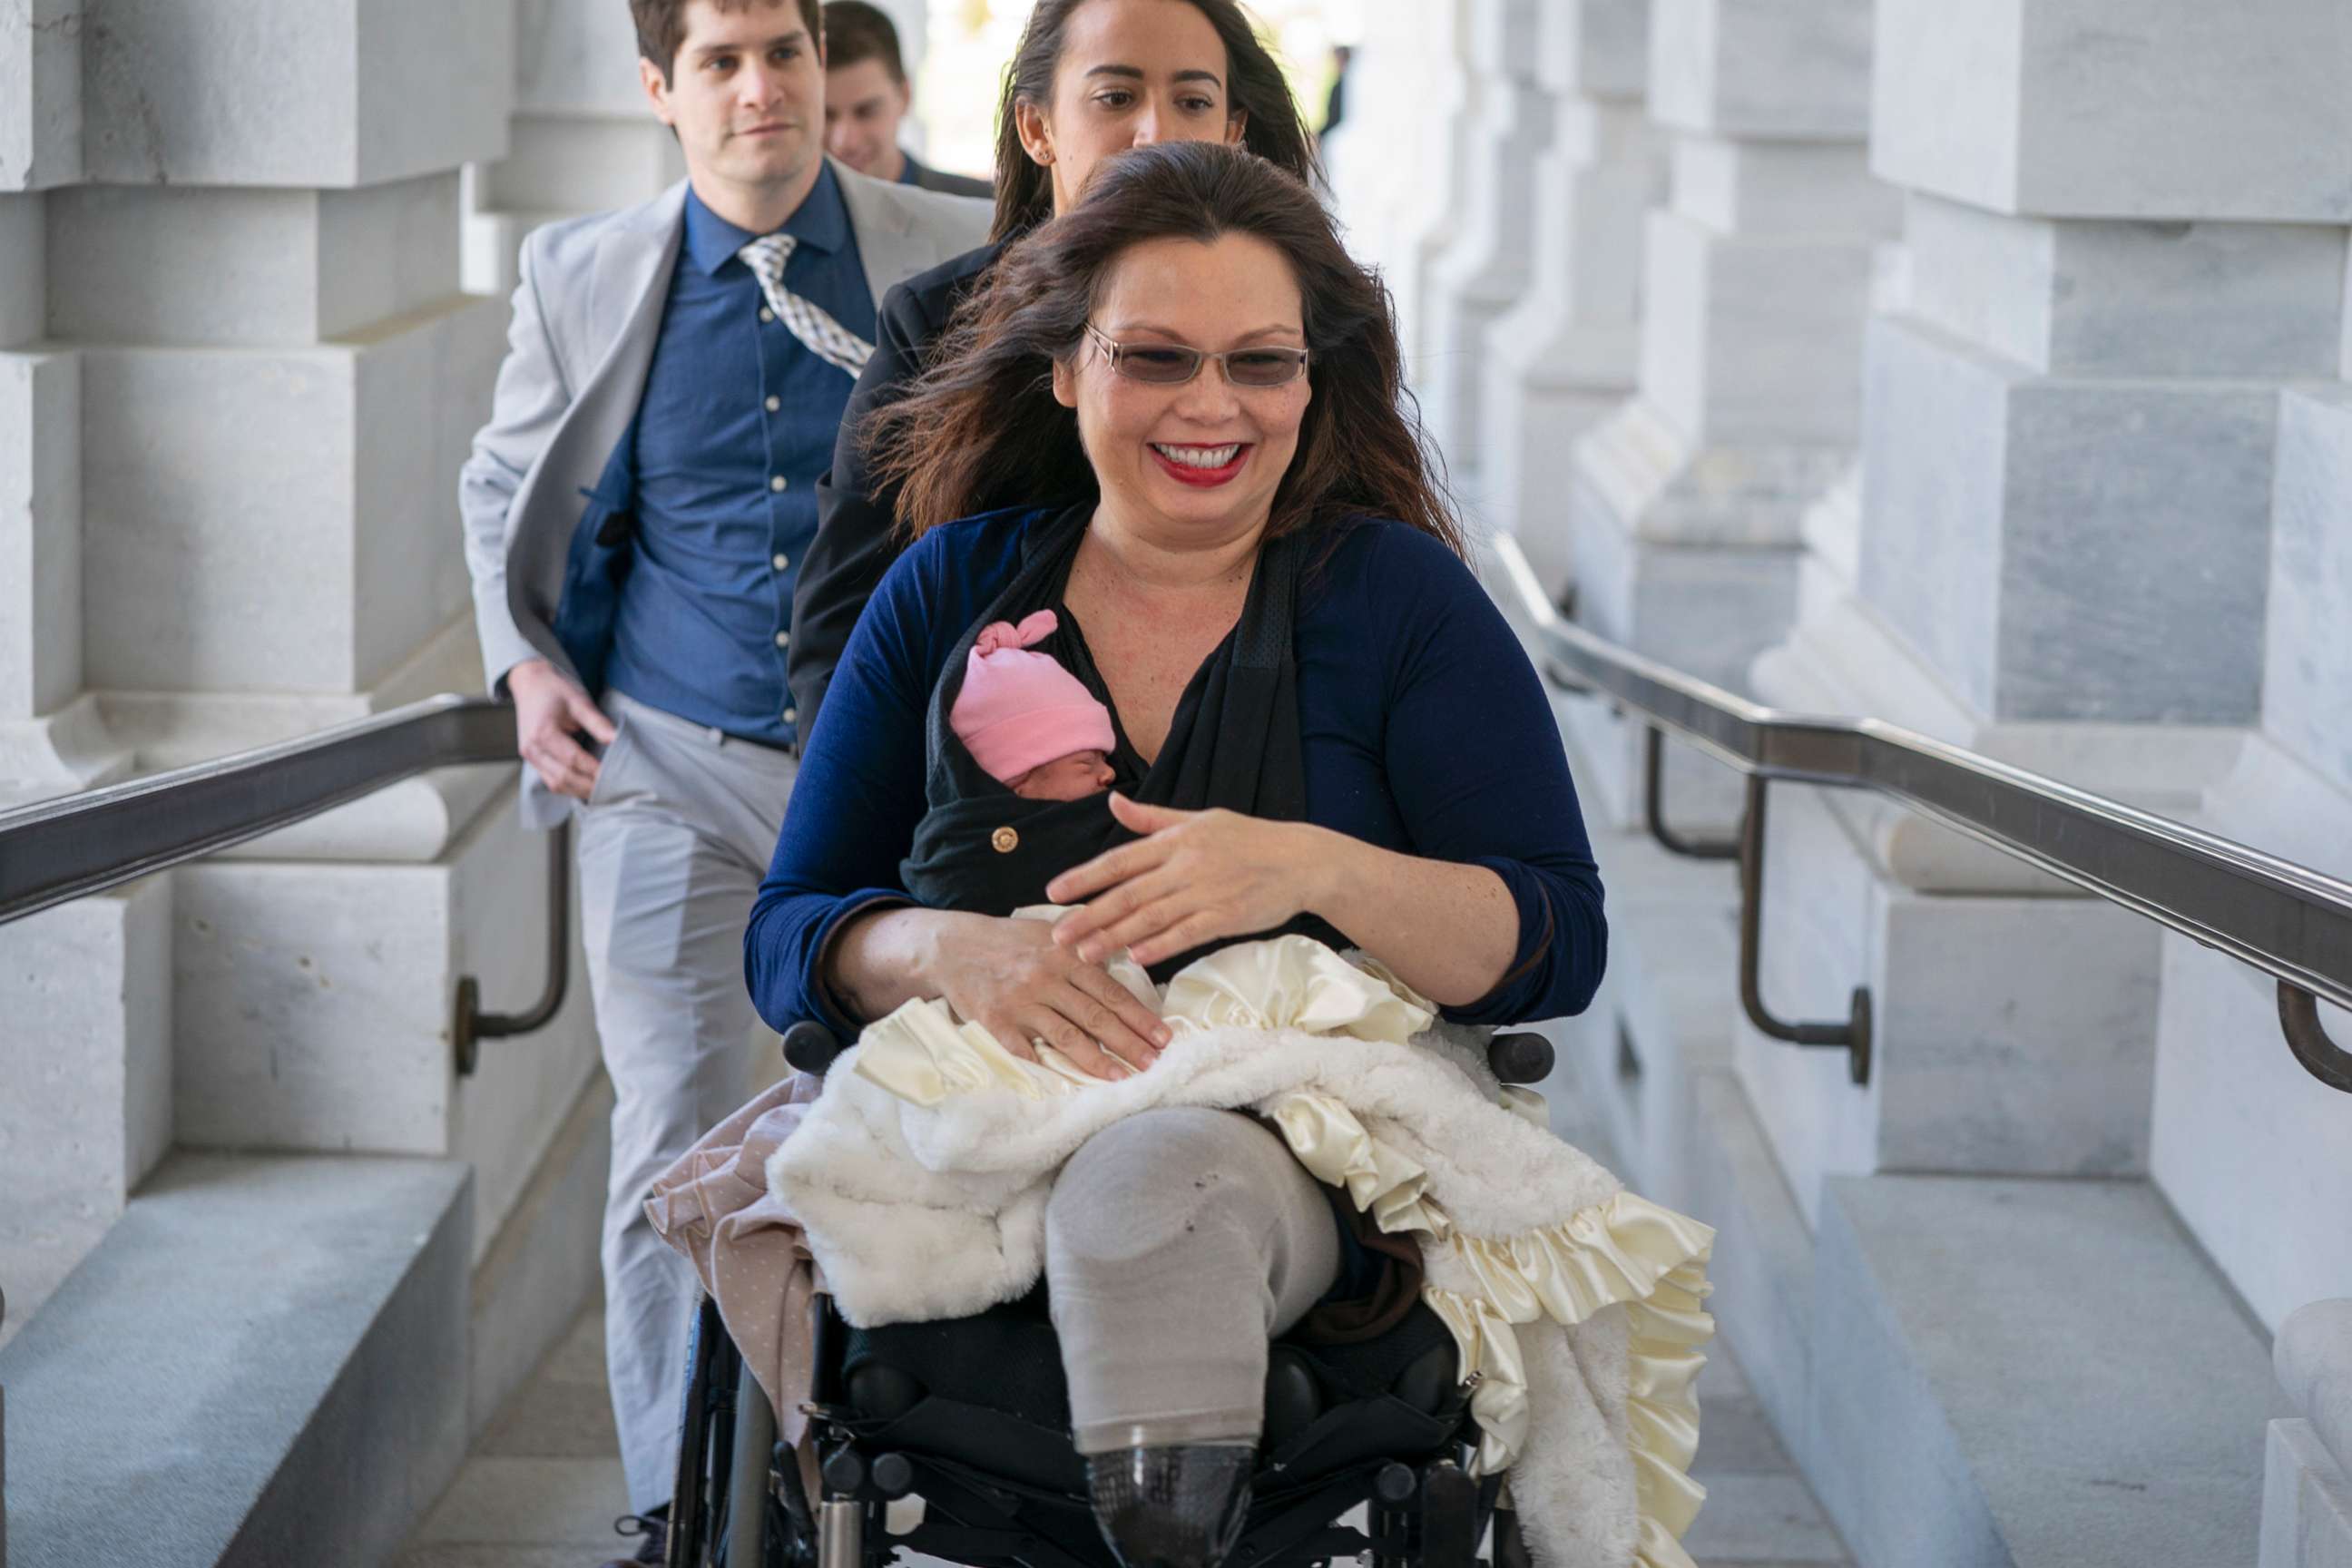 PHOTO: Sen. Tammy Duckworth arrives at the Capitol for vote with her new daughter, Maile, bundled against the wind, in Washington, D.C., April 19, 2018.